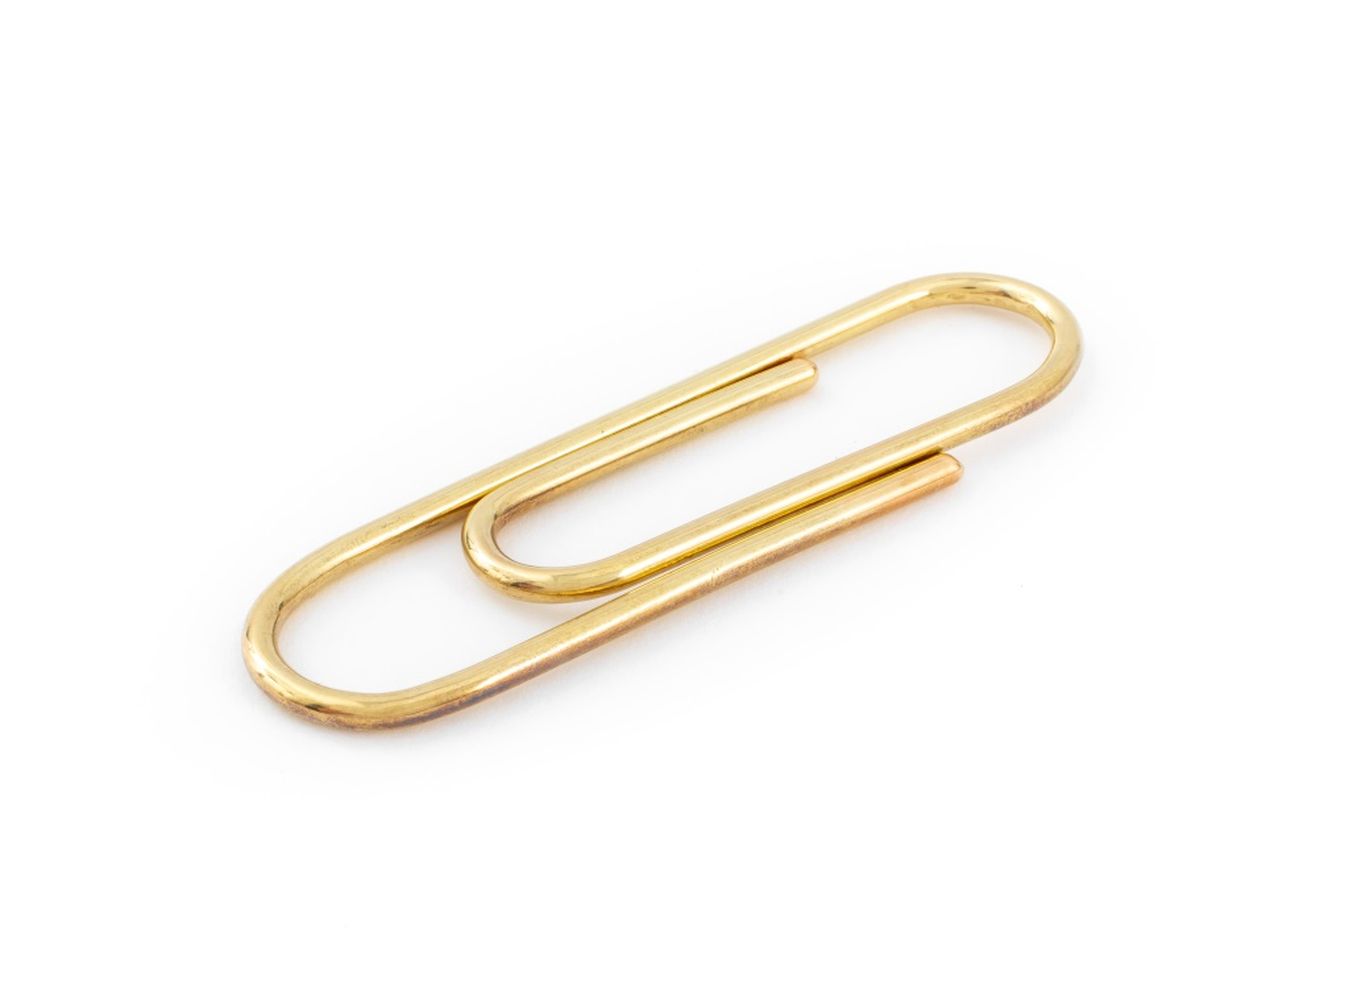 14K YELLOW GOLD PAPERCLIP FORM 30c2dd